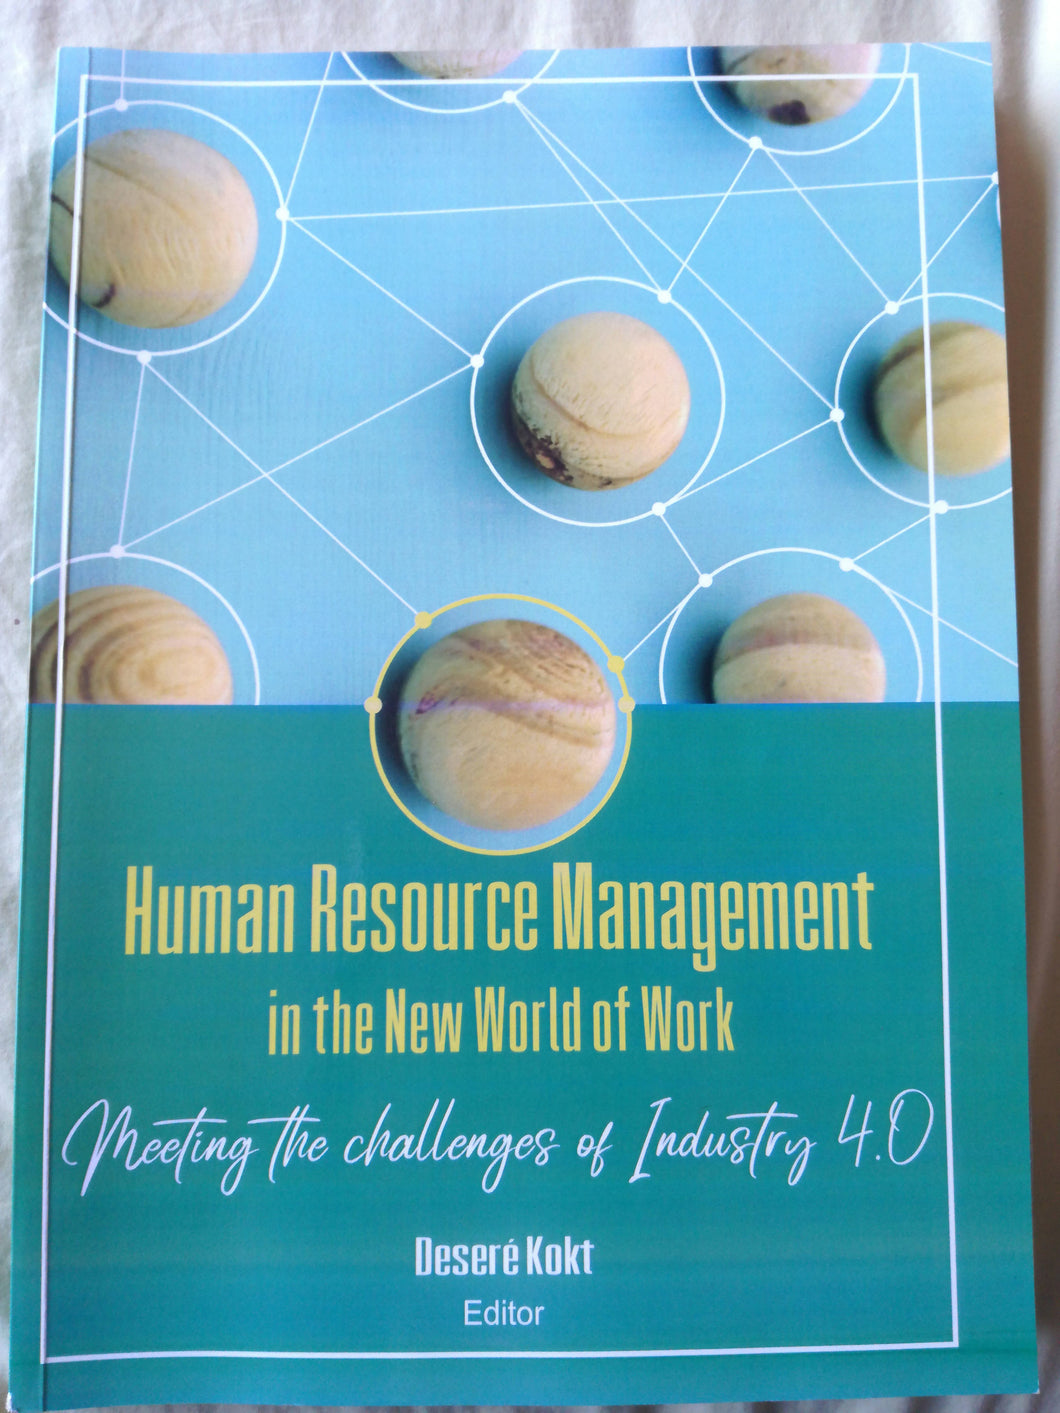 Human Resource Management in the New World of Work